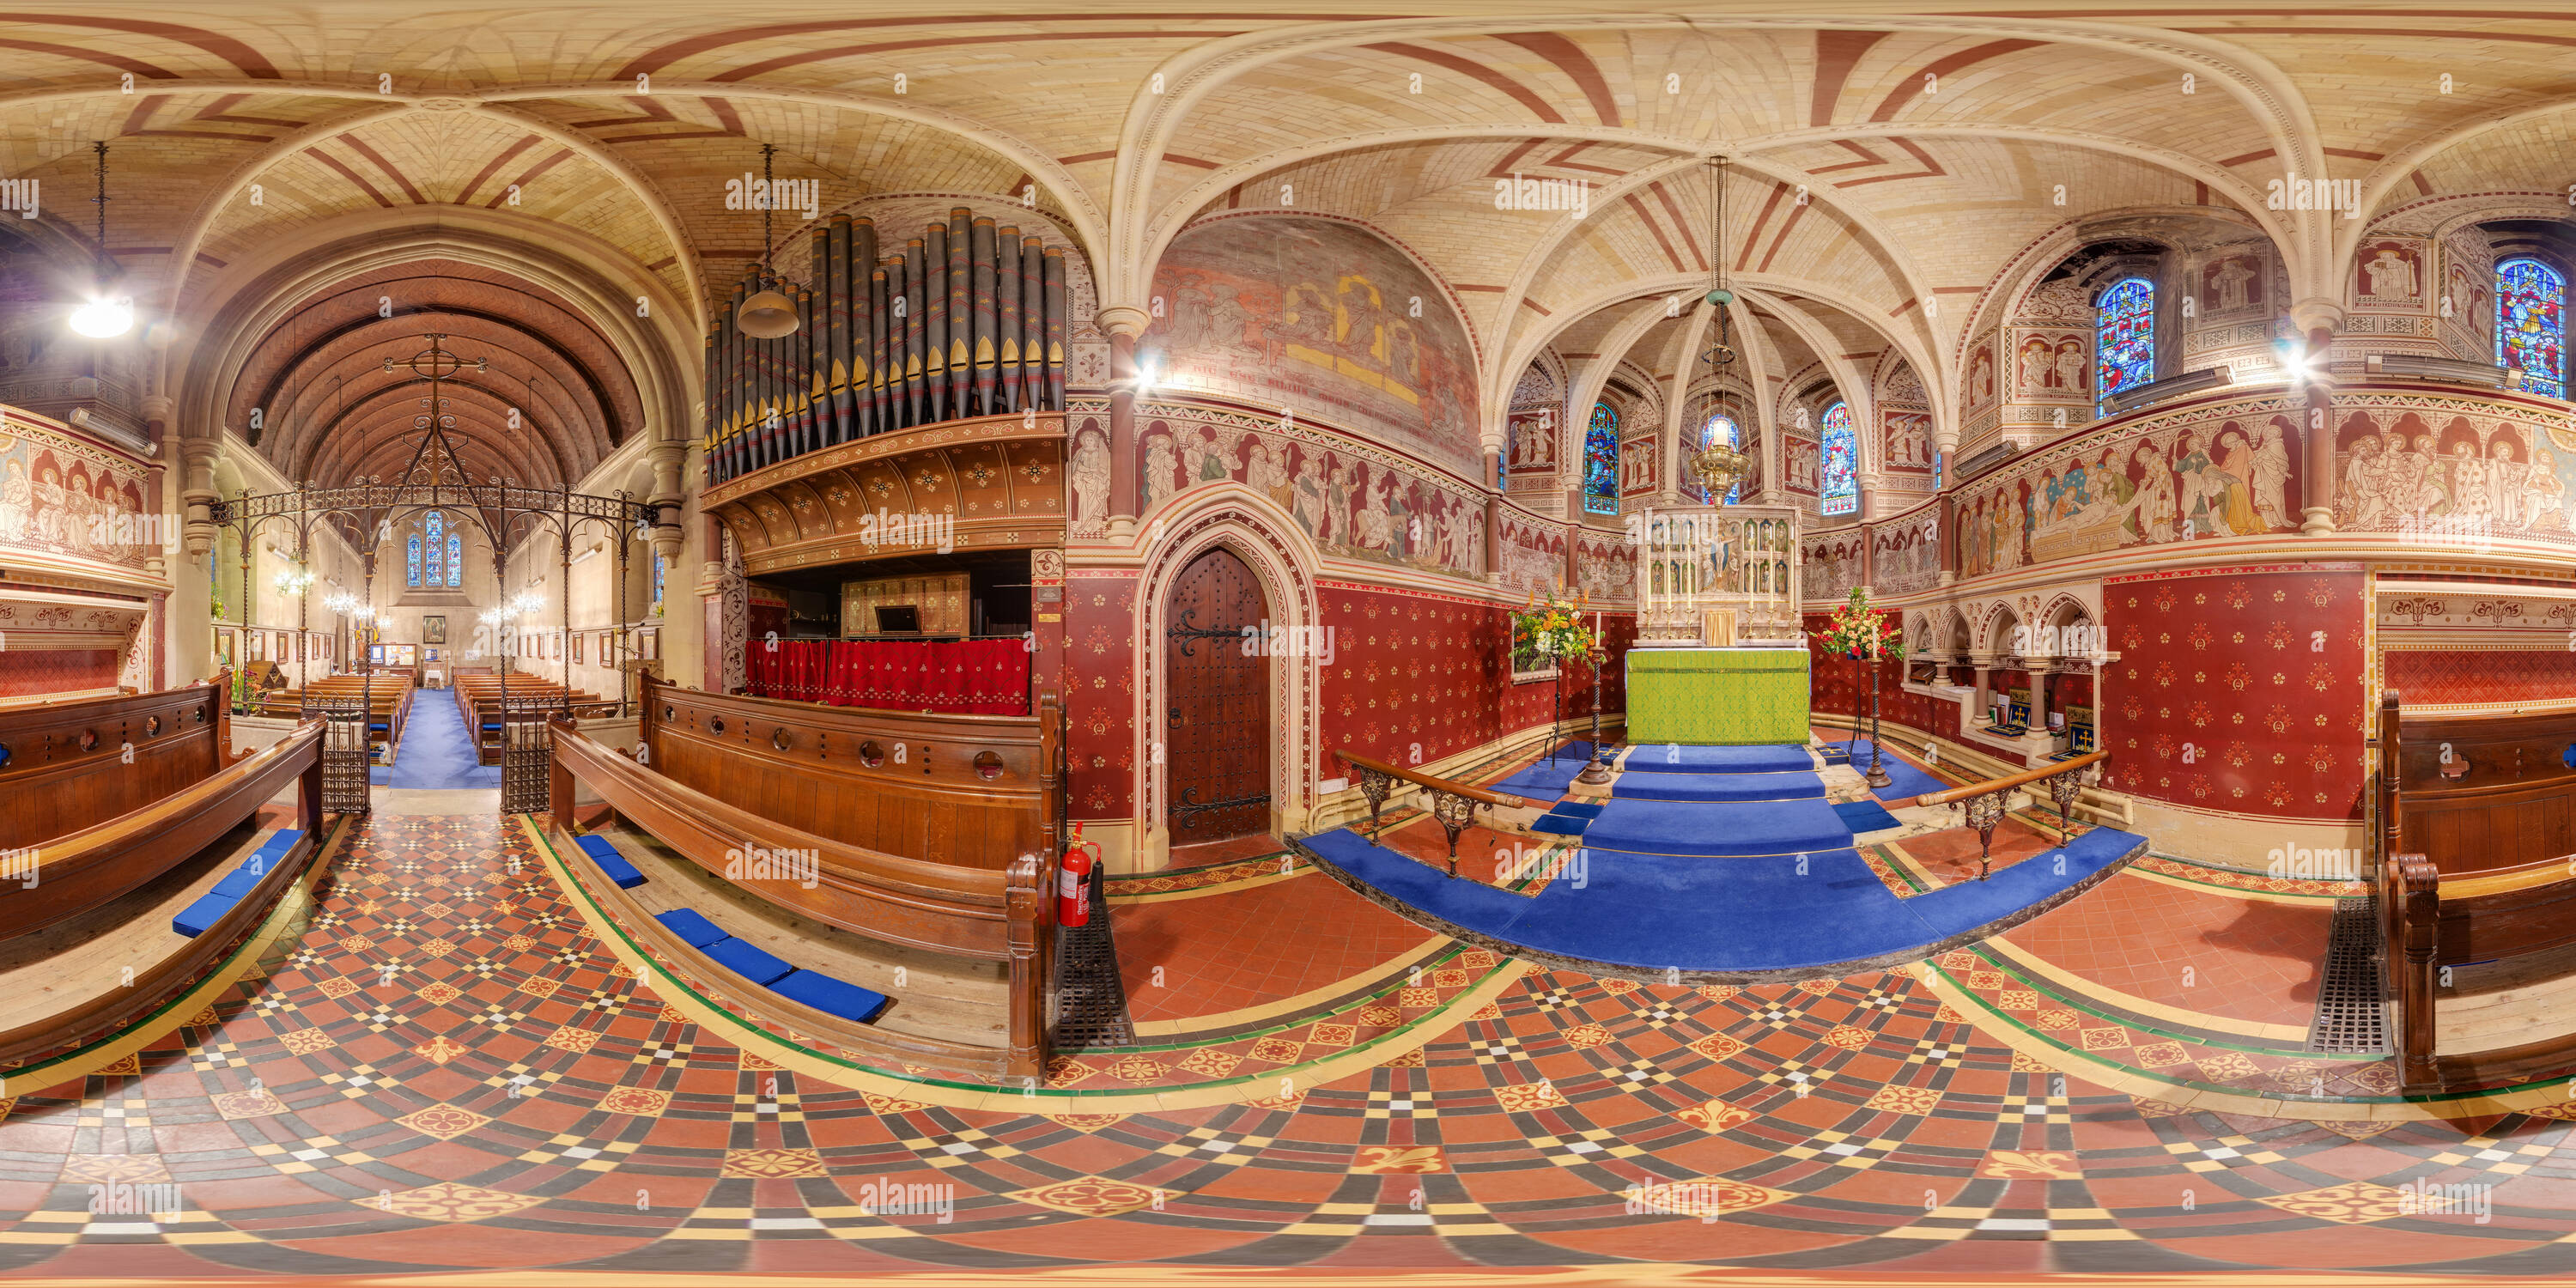 360 degree panoramic view of High Victorian Gothic Revival Church